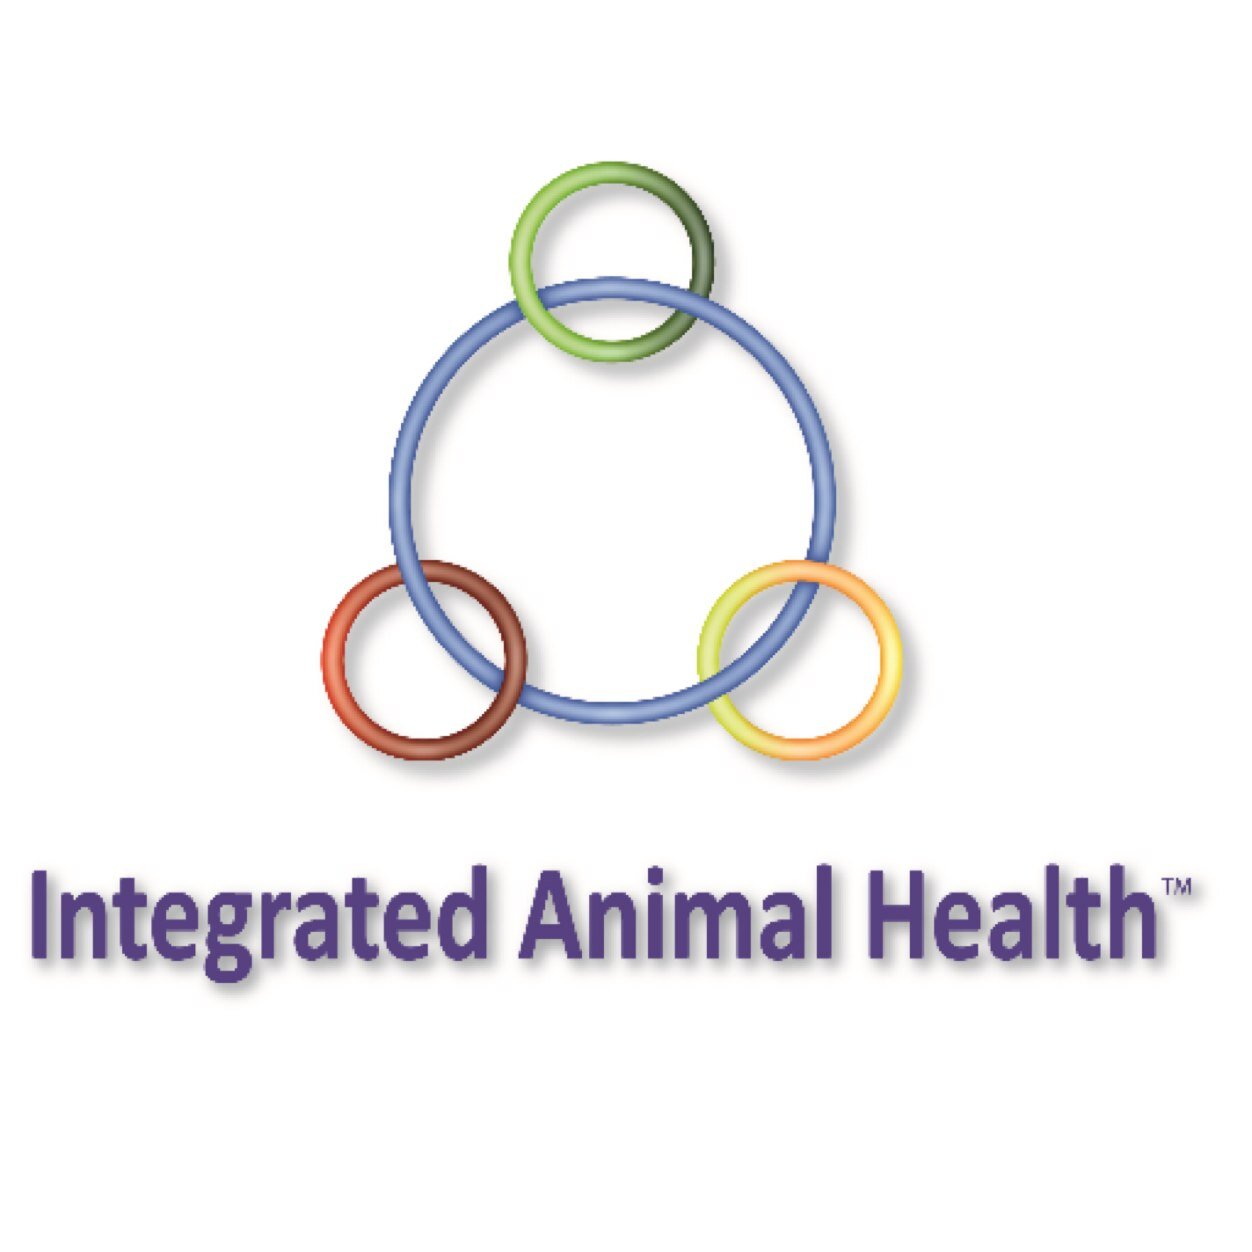 A market and science research division of Integrated Animal Health run by our coy Vets in USA and EU, develops cutting edge OTC and Therapeutic applications